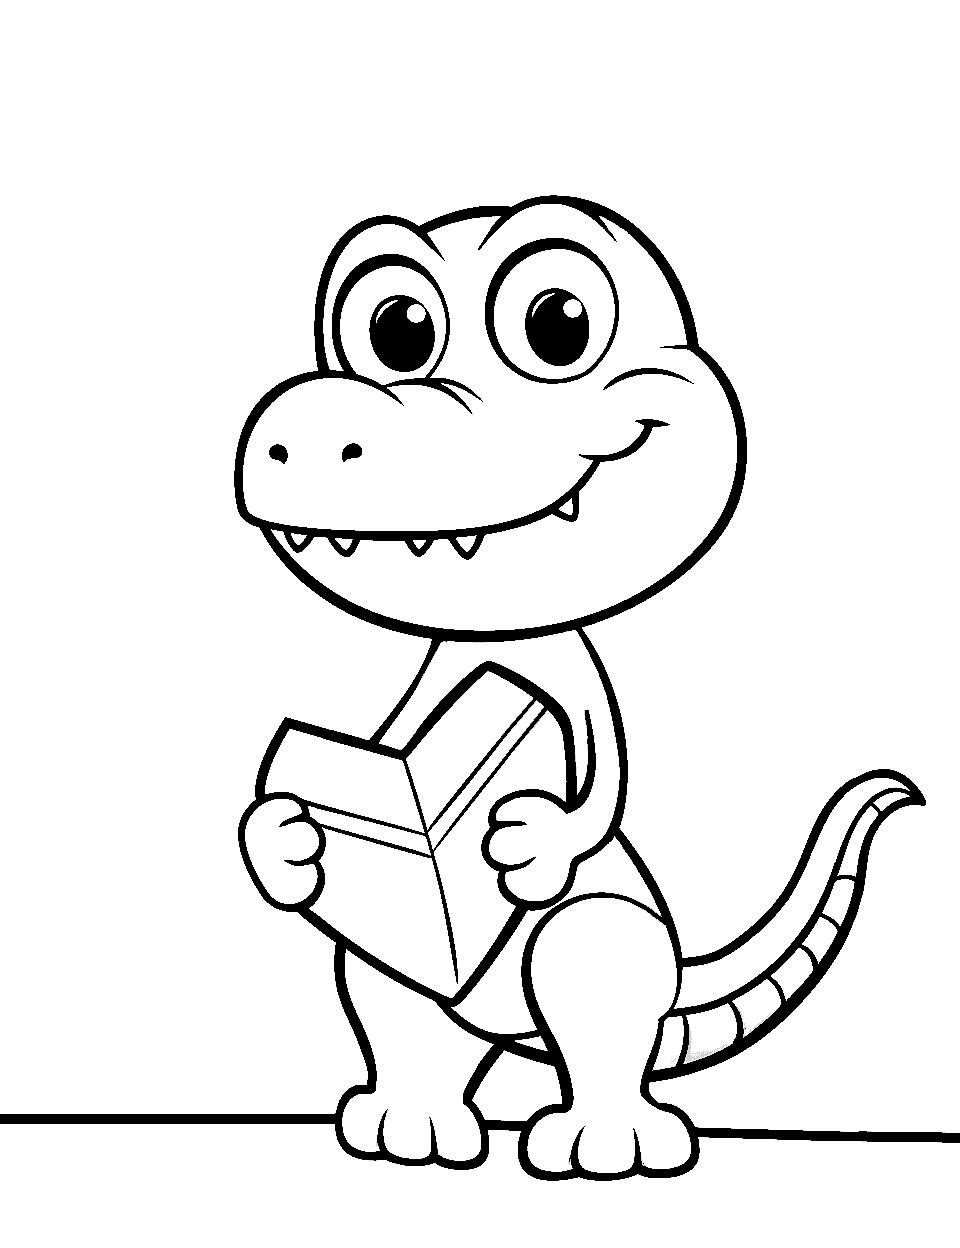 Dinosaur with a Love Letter Coloring Page - A friendly T-Rex holding an envelope shaped like a heart.